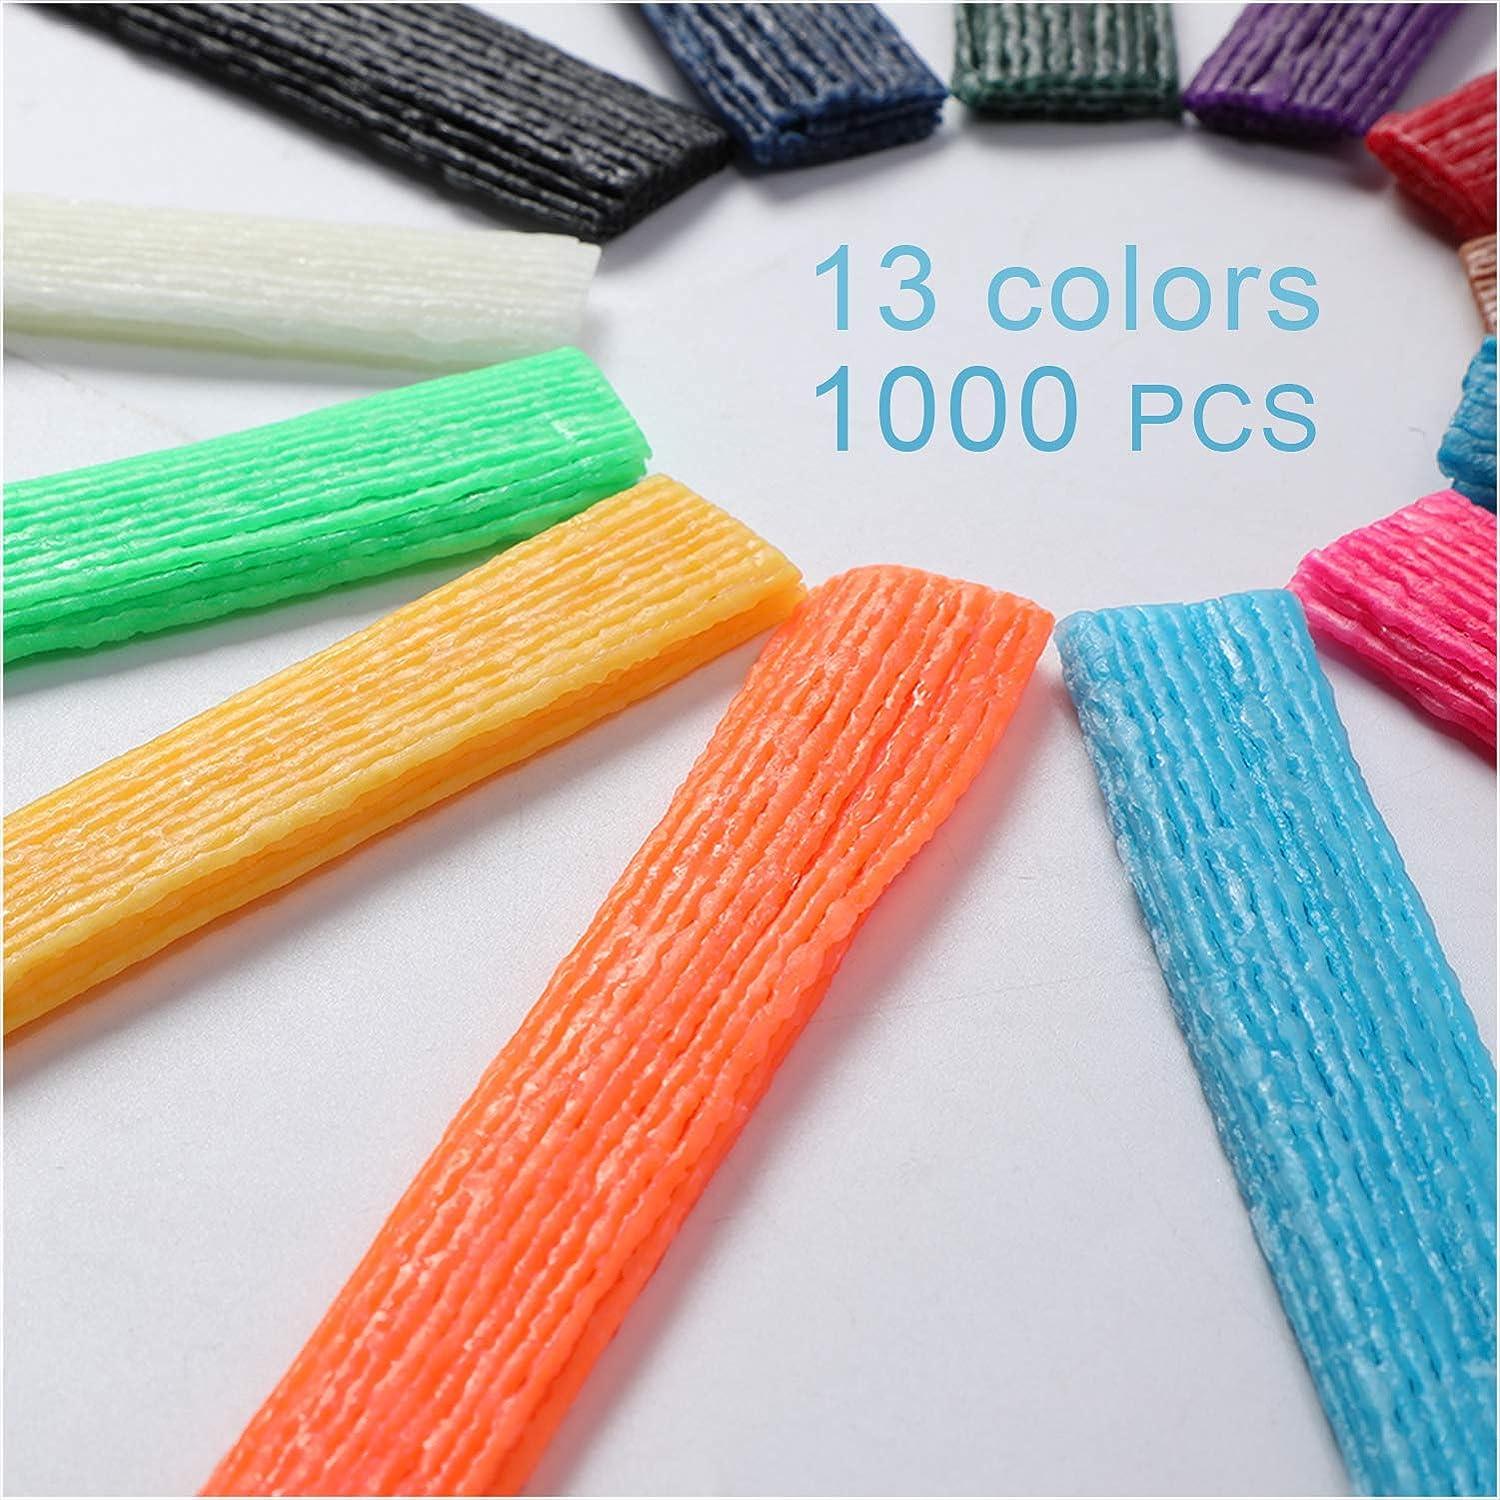  UPINS Wax Craft Sticks for Kids Bulk 1500Pcs Bendable Sticky  Wax Yarn Sticks in 13 Colors with Storage Bag for Kids Child Adults DIY Art  Supplies : Arts, Crafts & Sewing